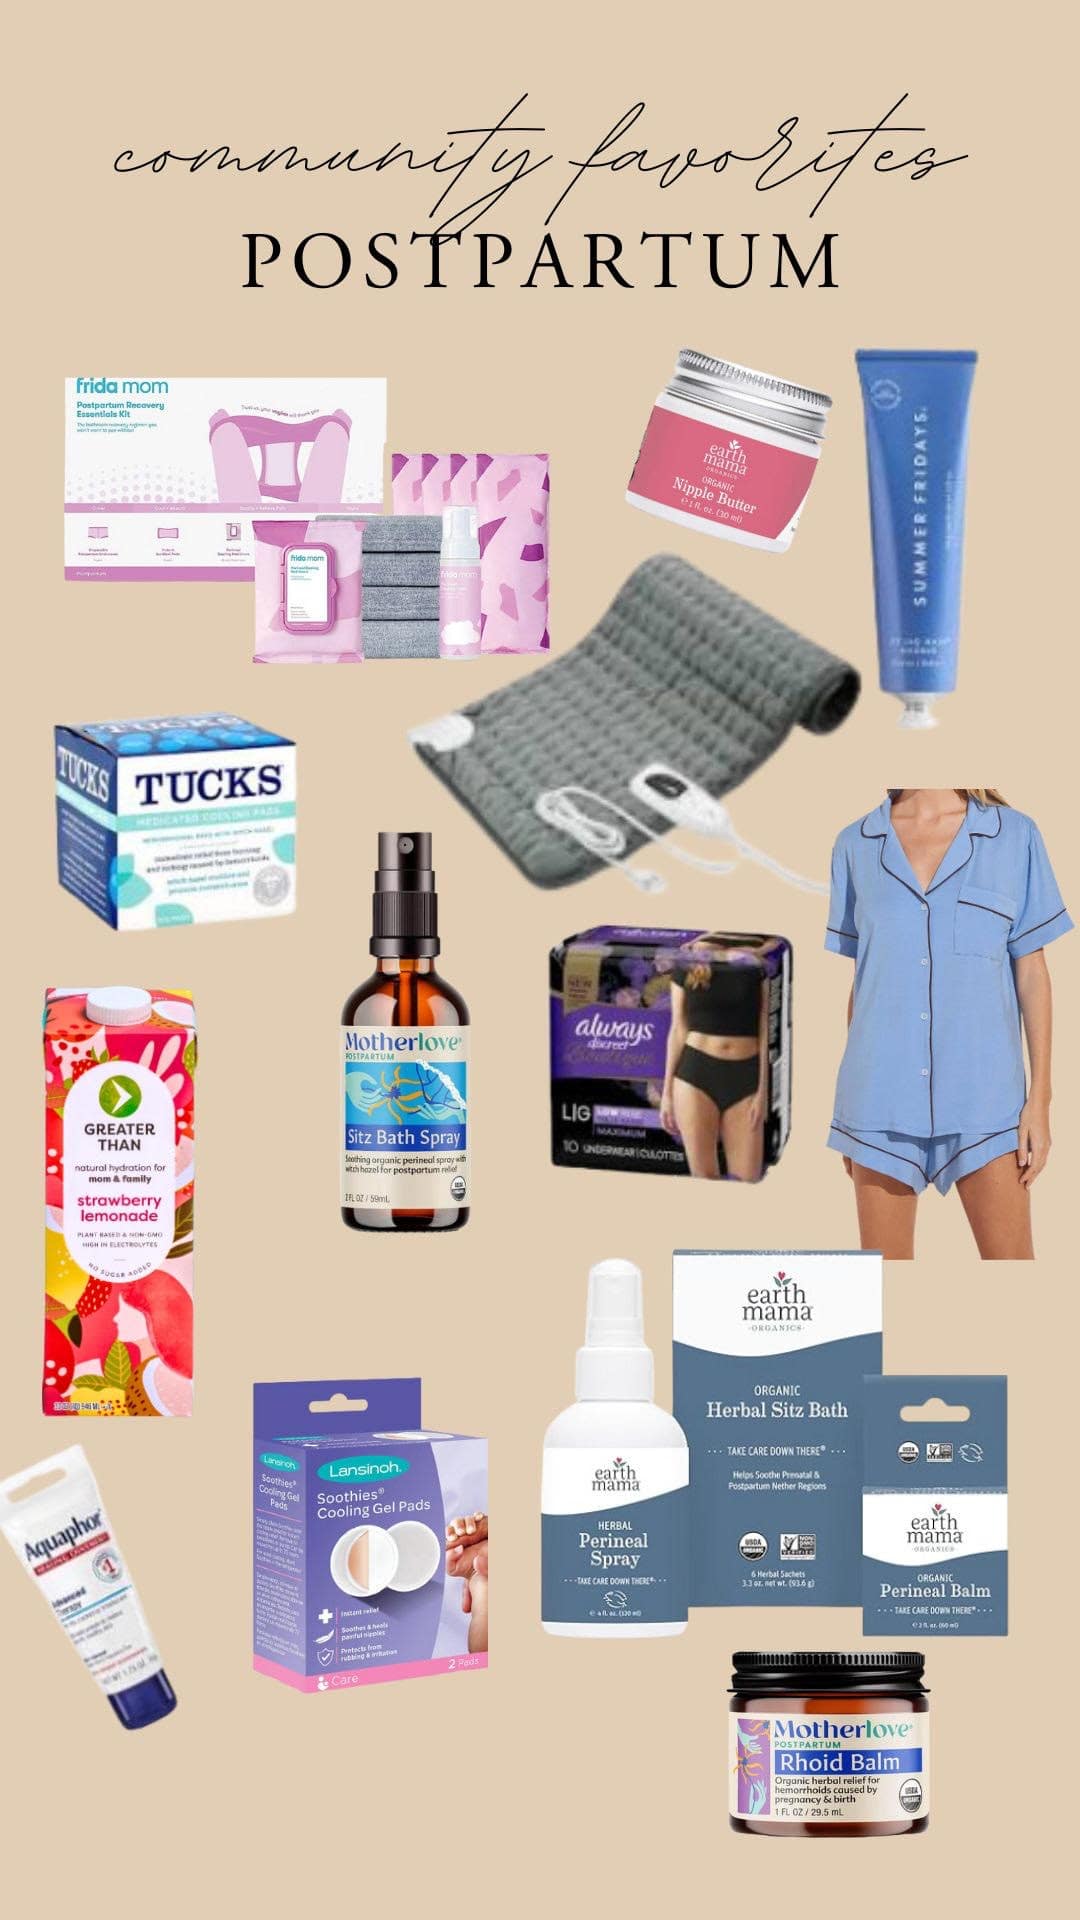 Ten Postpartum Essentials And Tips For New Mothers